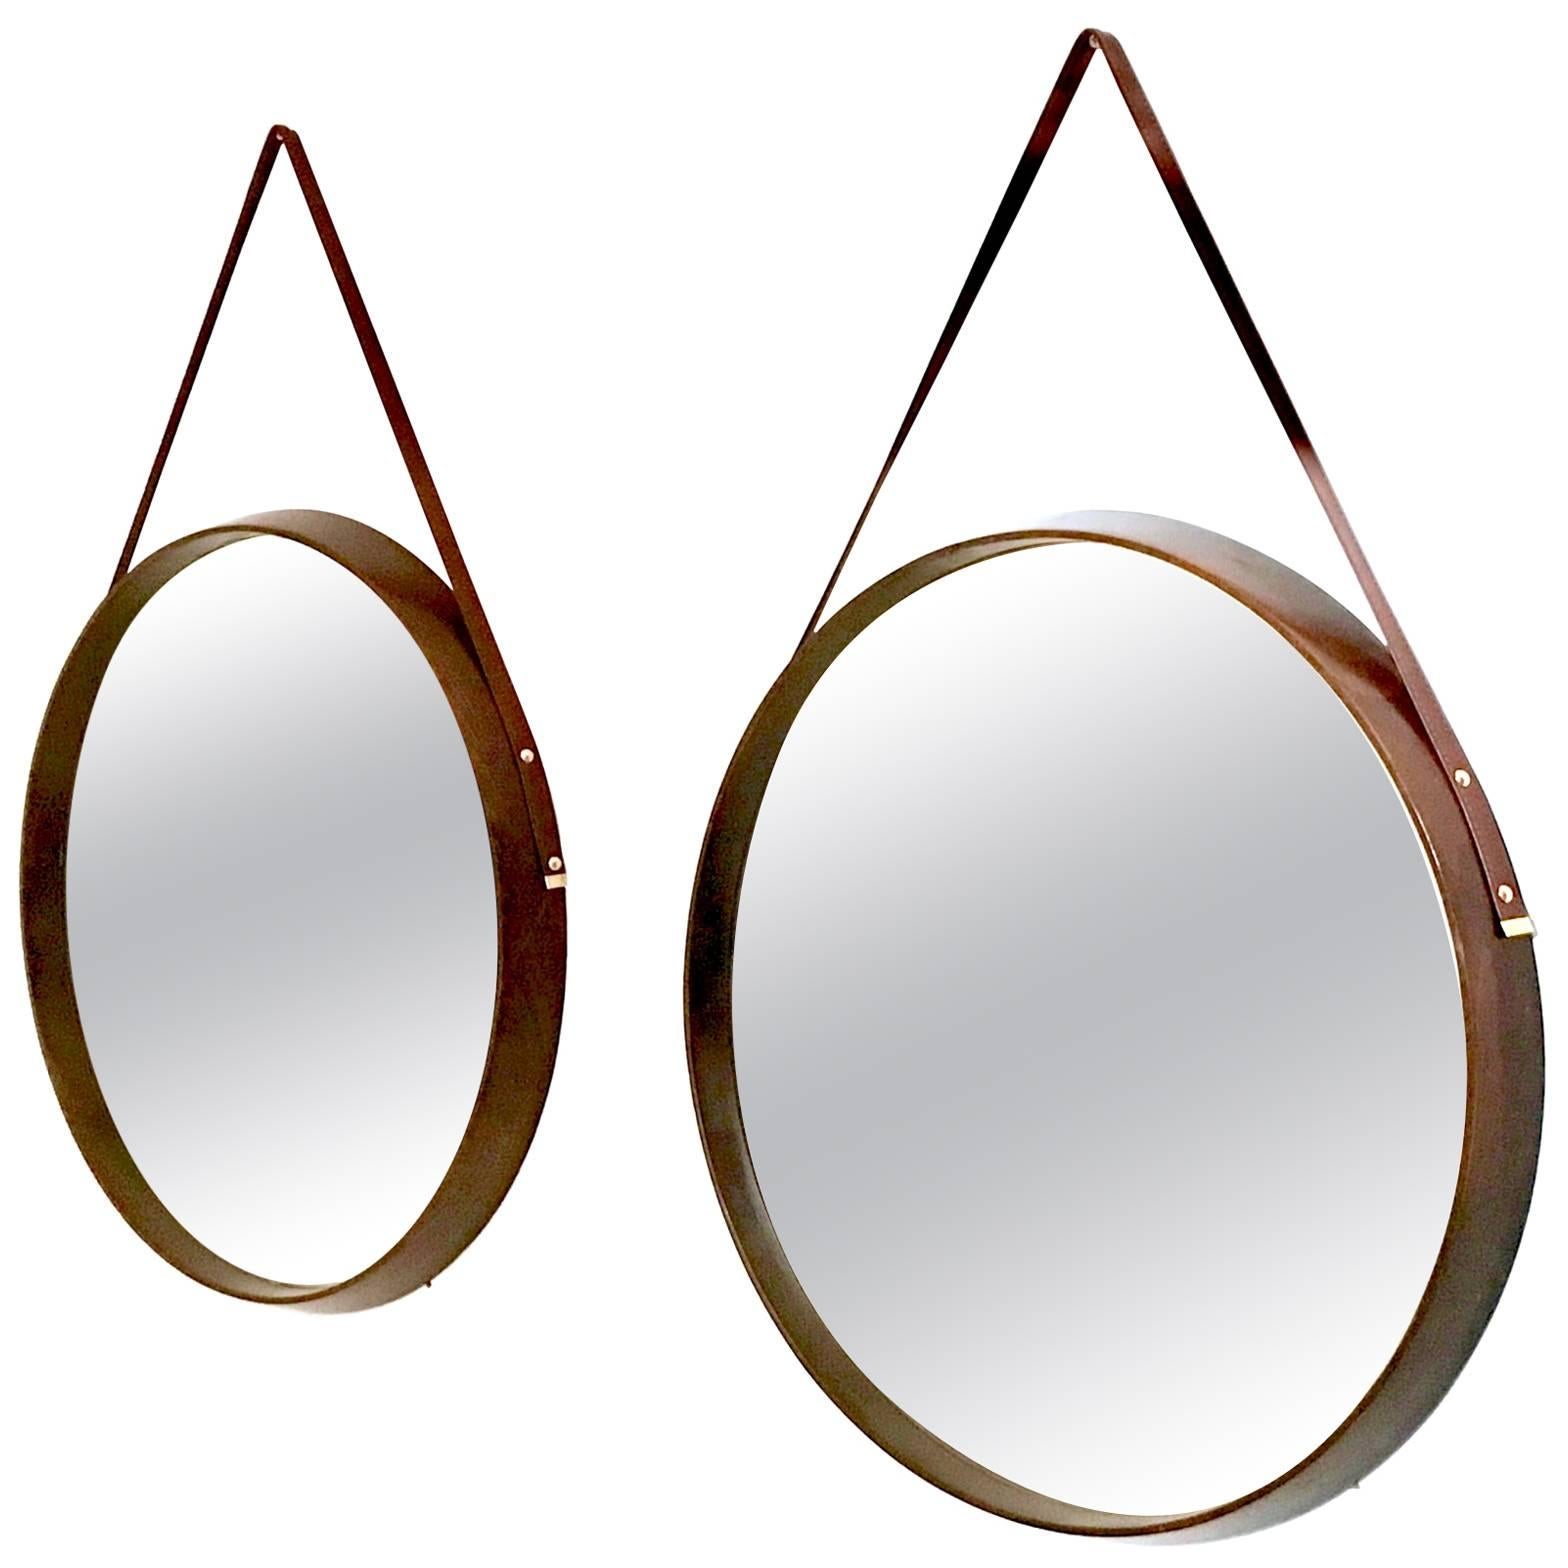 Pair of Round Mahogany and Leather Wall Mirrors, Italy, 1950s